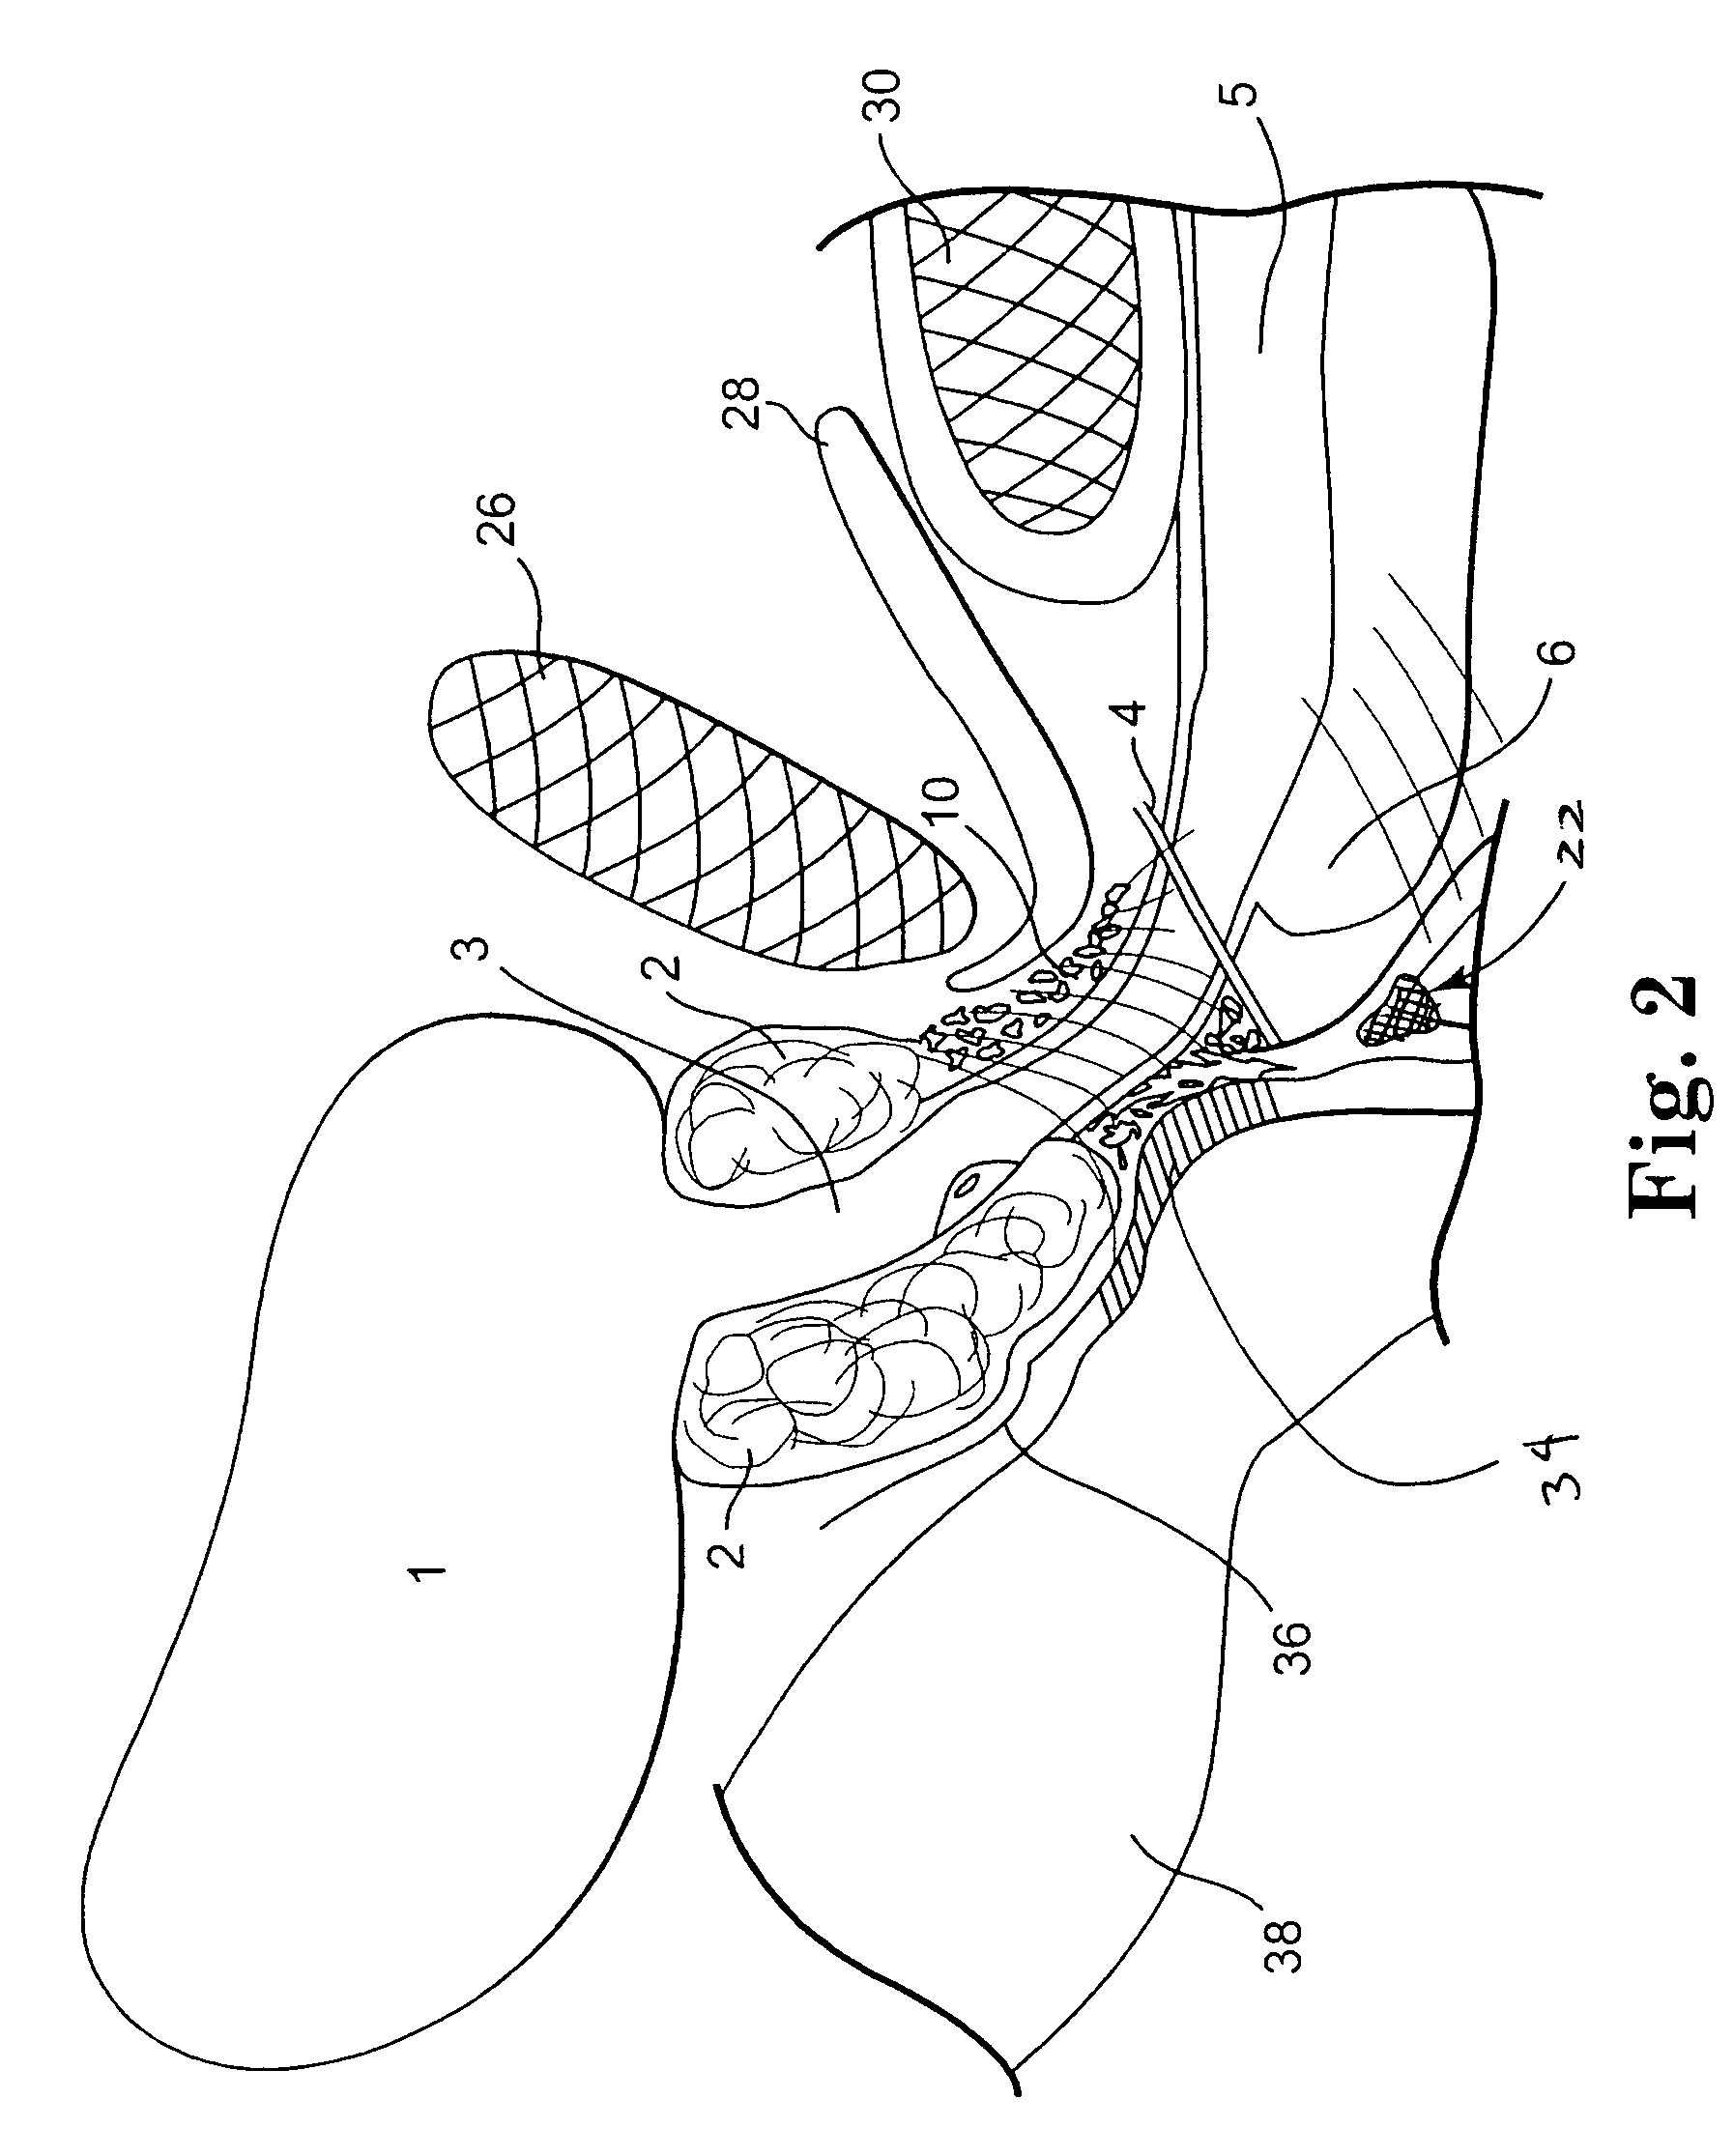 Transobturator methods for installing sling to treat incontinence, and related devices